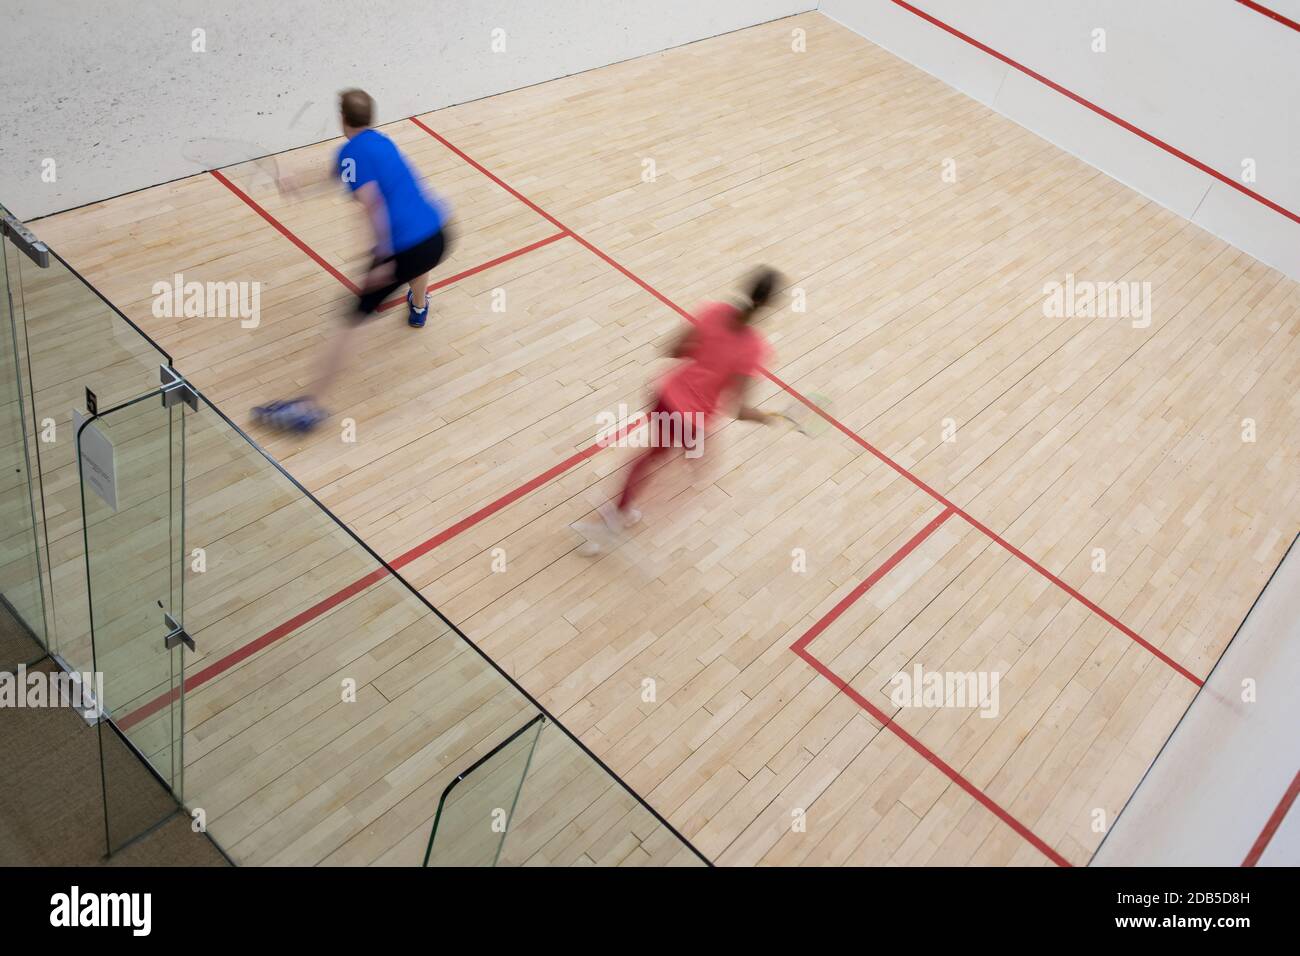 Squash players in action on a squash court (motion blurred image; color toned image) Stock Photo